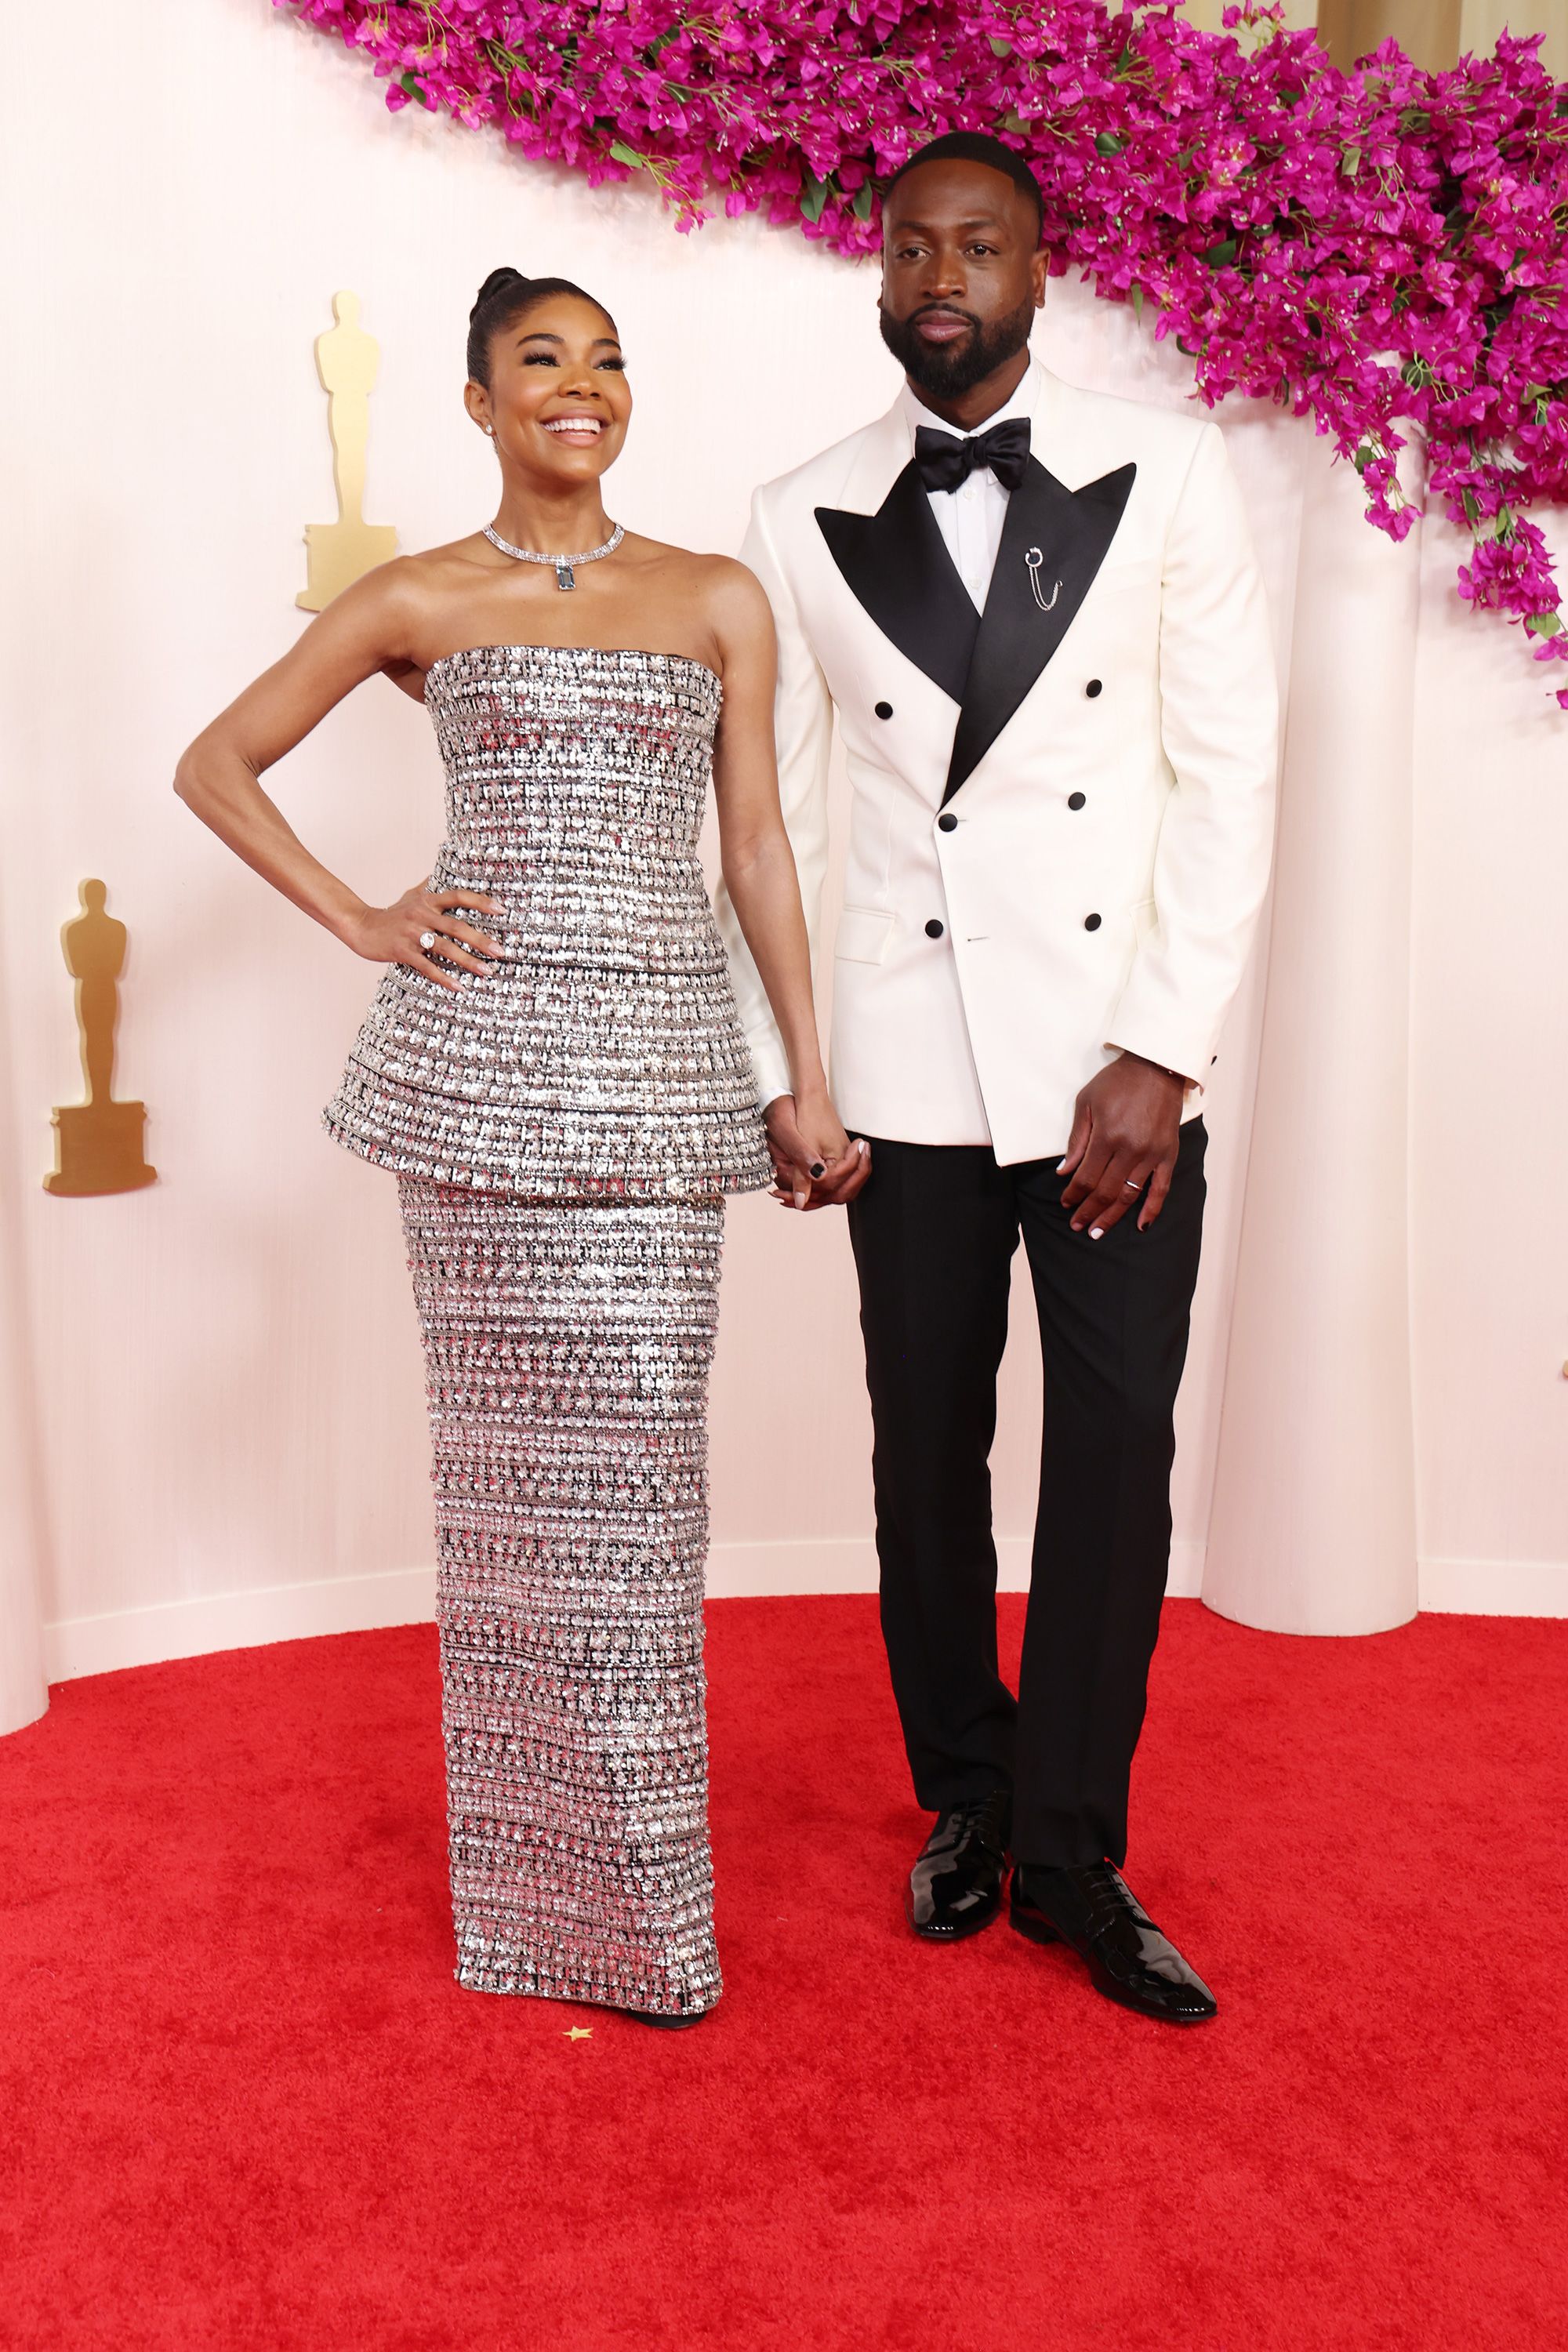 Gabrielle Union, pictured with husband Dwyane Wade (in custom Atelier Versace), turned heads in a bedazzled Carolina Herrera gown layered with a matching floor-length skirt. She completed the look with a diamond necklace from Tiffany & Co.